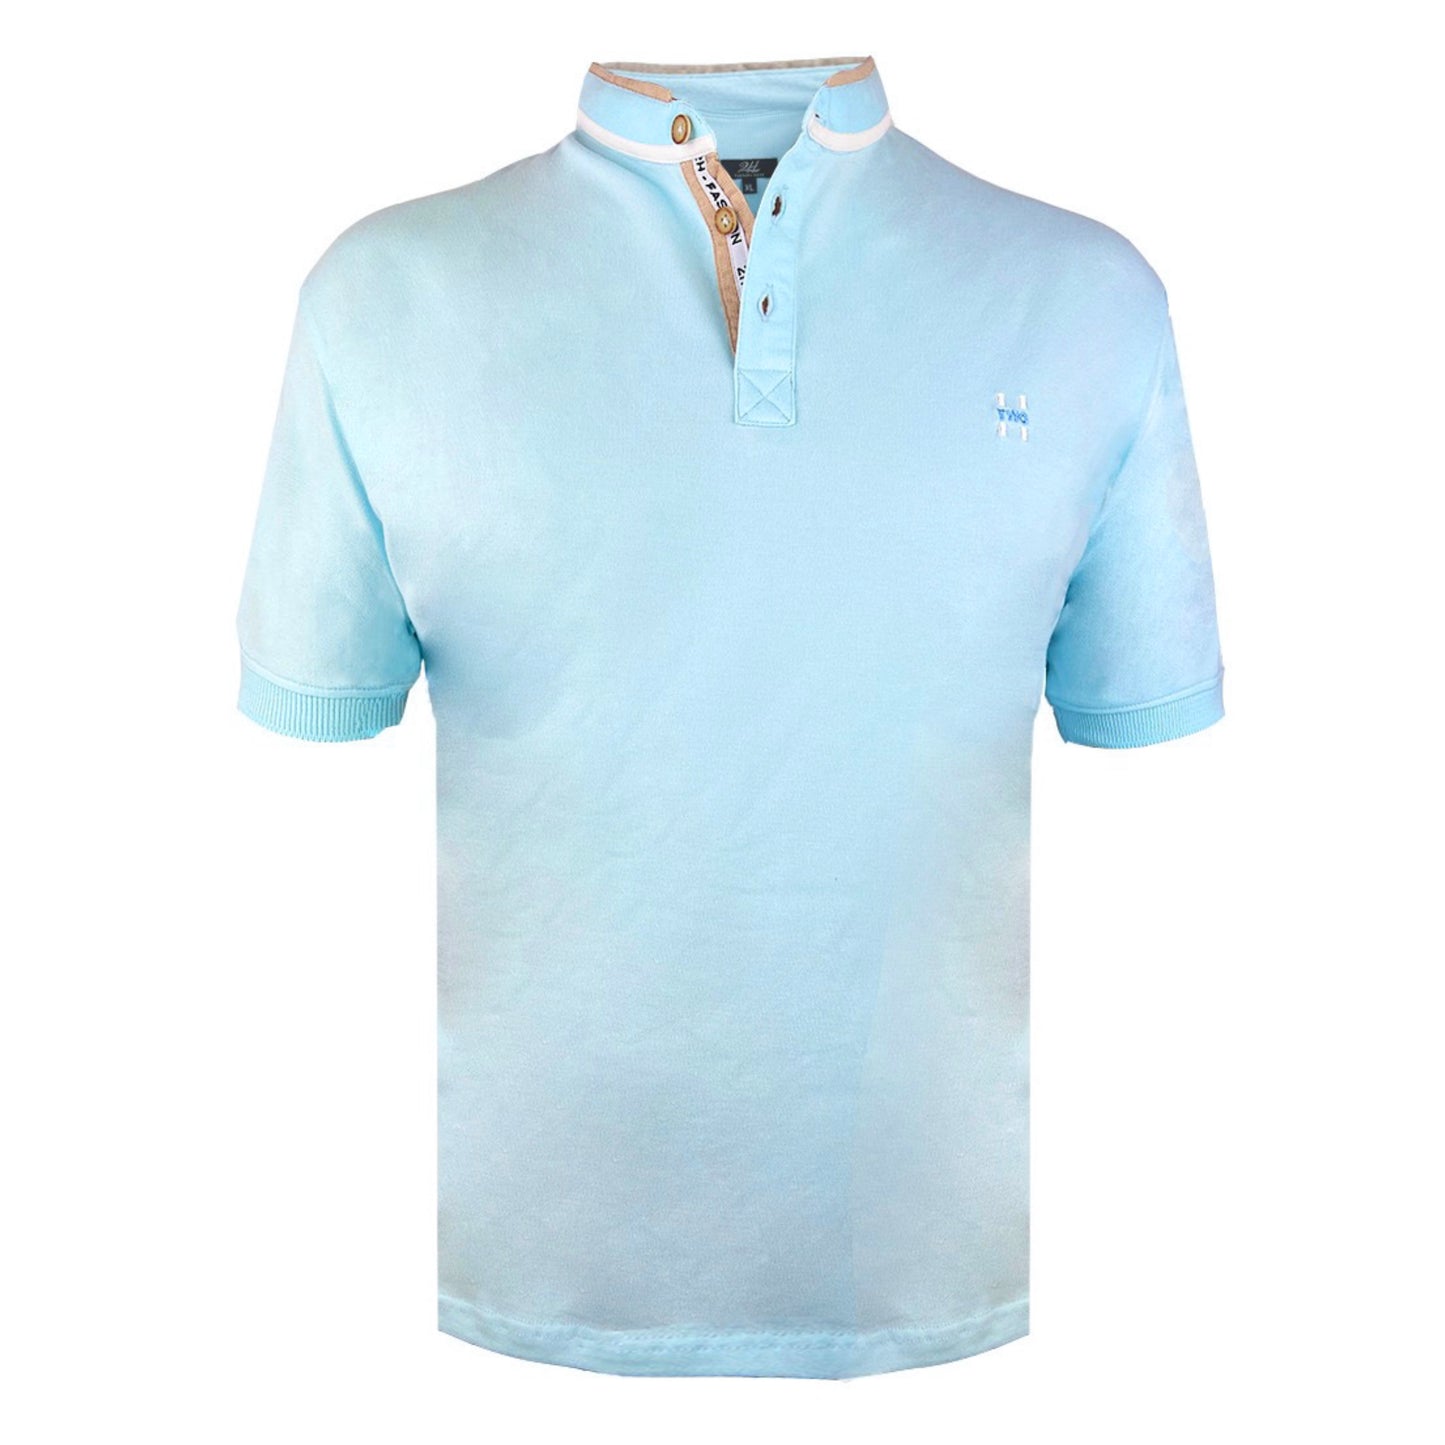 2H #77041 Baby Blue Stand Up Collar T-shirt